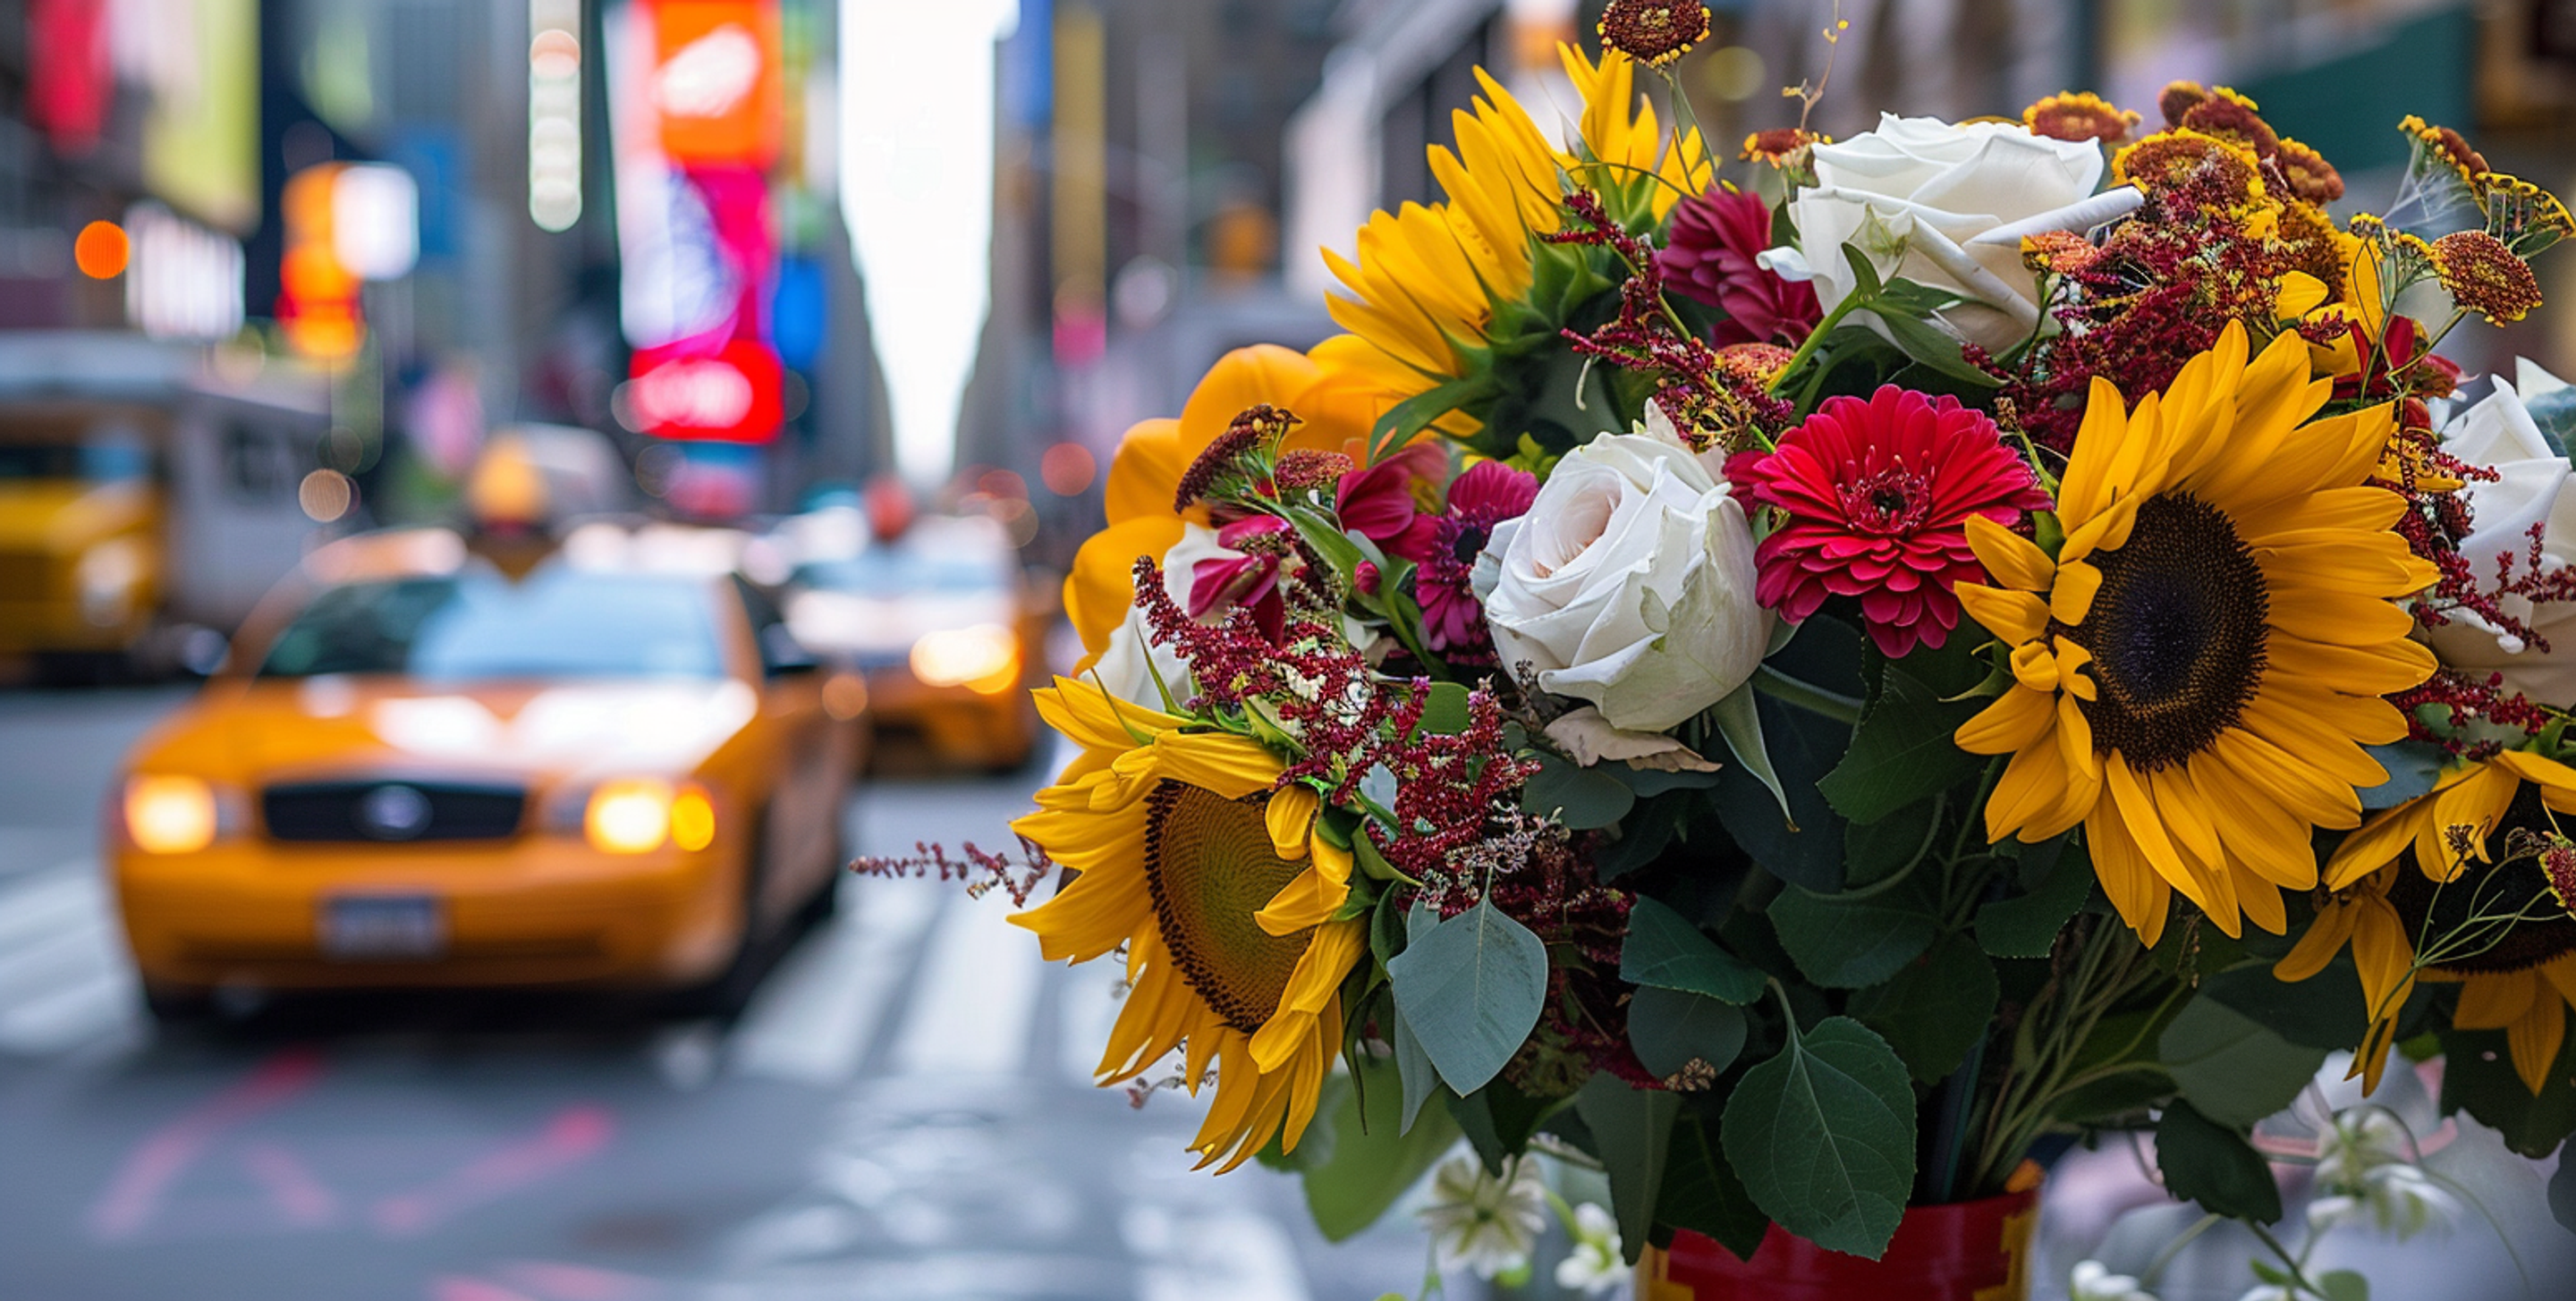 Photo of flower arrangement in focus with sunflowers, white roses. Background in blur is the city of new york with a yellow taxi in times square. Flower delivery in new york city.